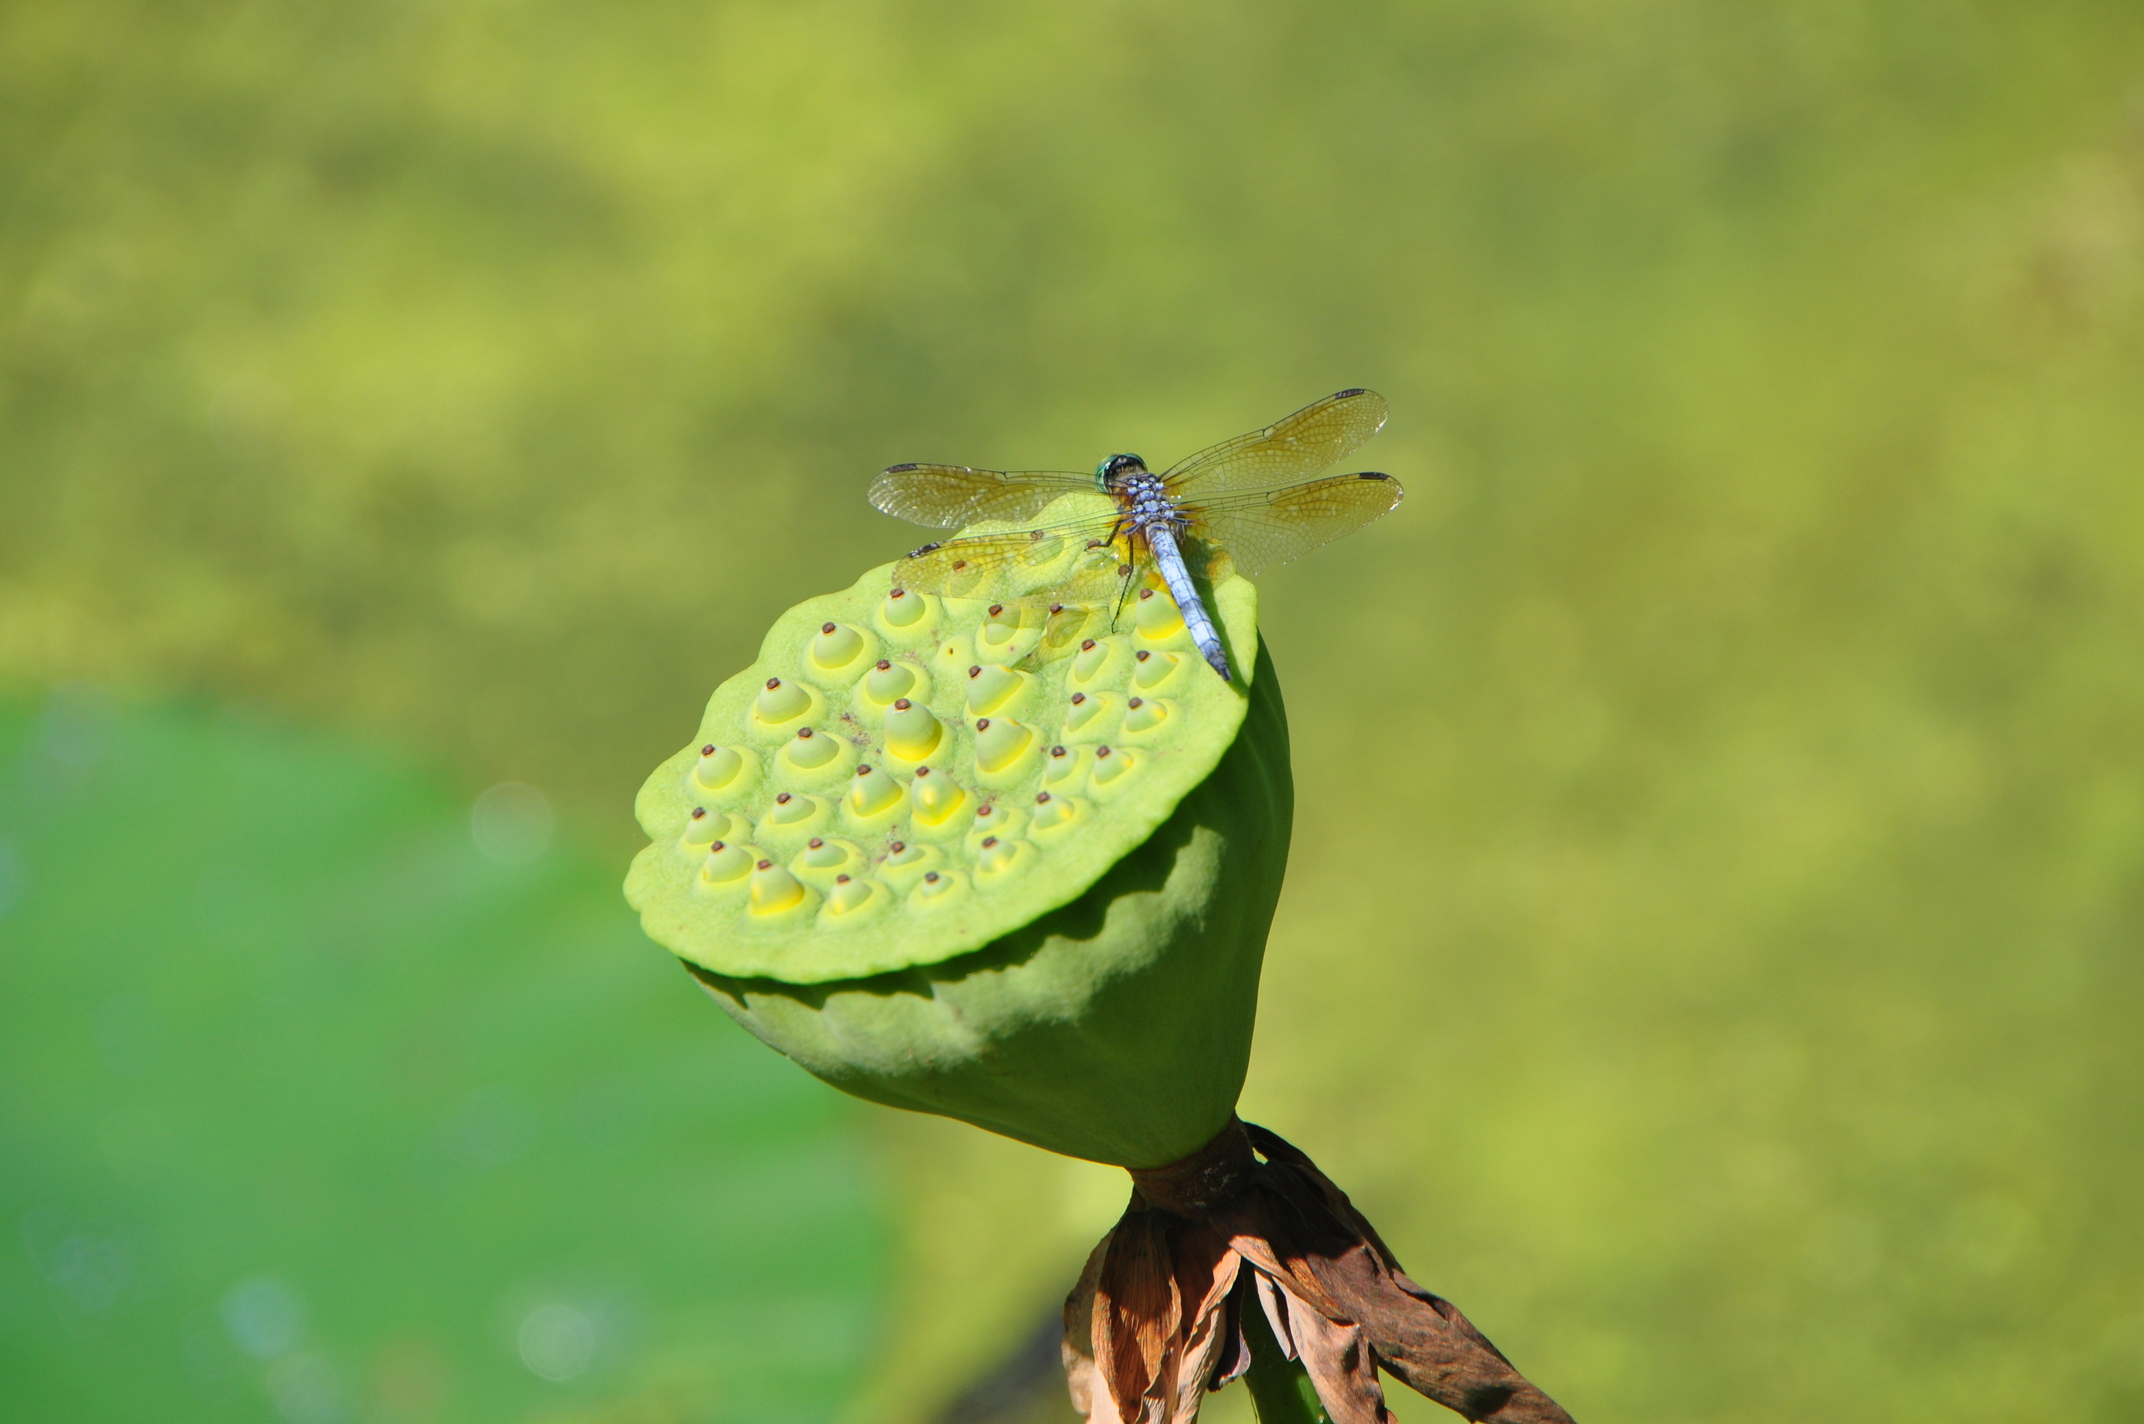 Dragonfly on a lotus seed pod